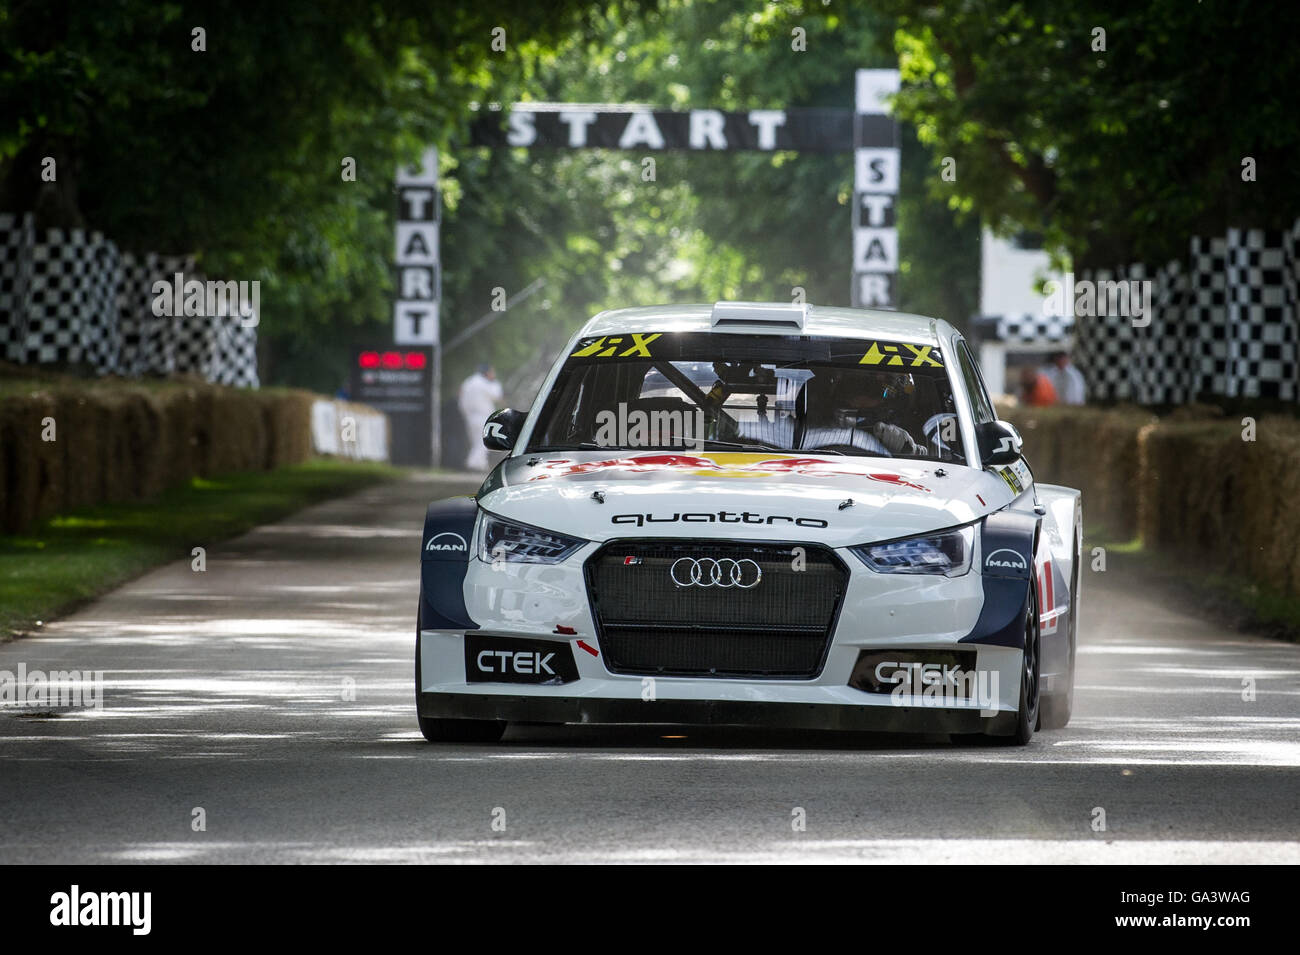 Andrew Jordan drives the Audi S1 EKS RX Rallycross car up the hill at the Goodwood Festival of Speed 2016 Stock Photo